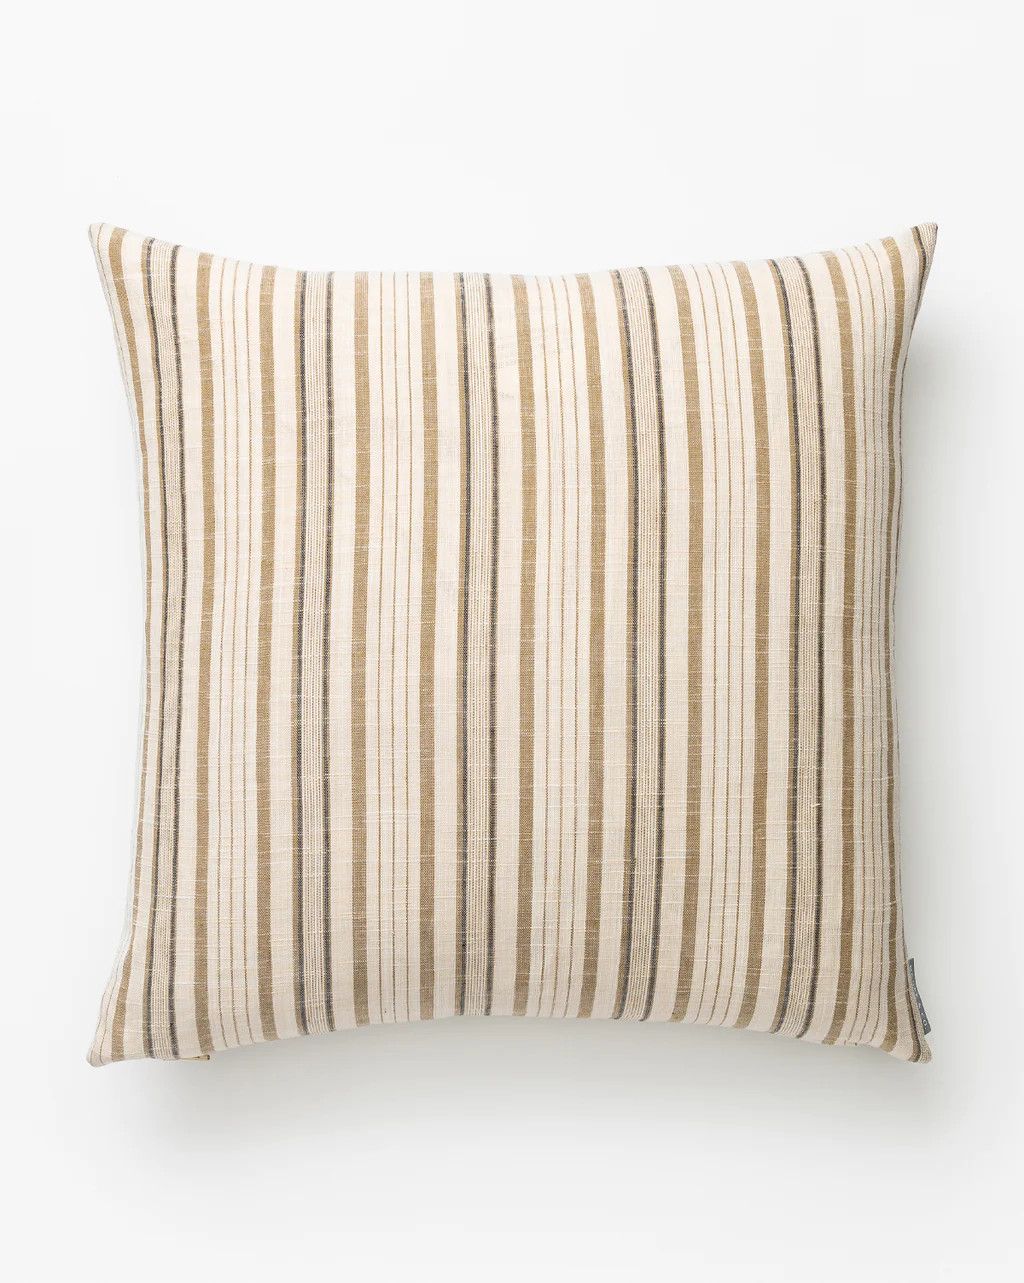 Archie Pillow Cover | McGee & Co.